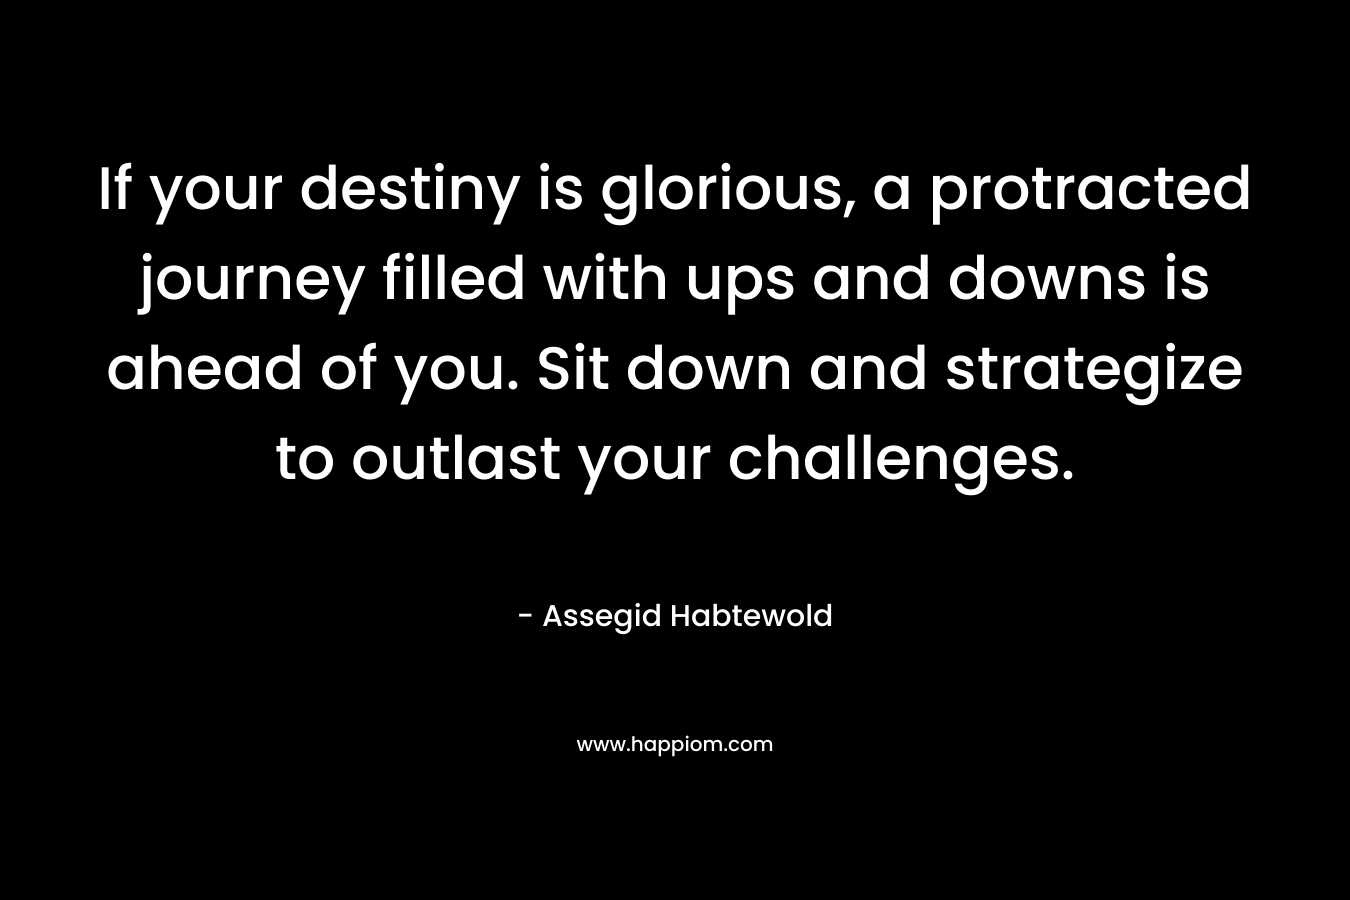 If your destiny is glorious, a protracted journey filled with ups and downs is ahead of you. Sit down and strategize to outlast your challenges. – Assegid Habtewold